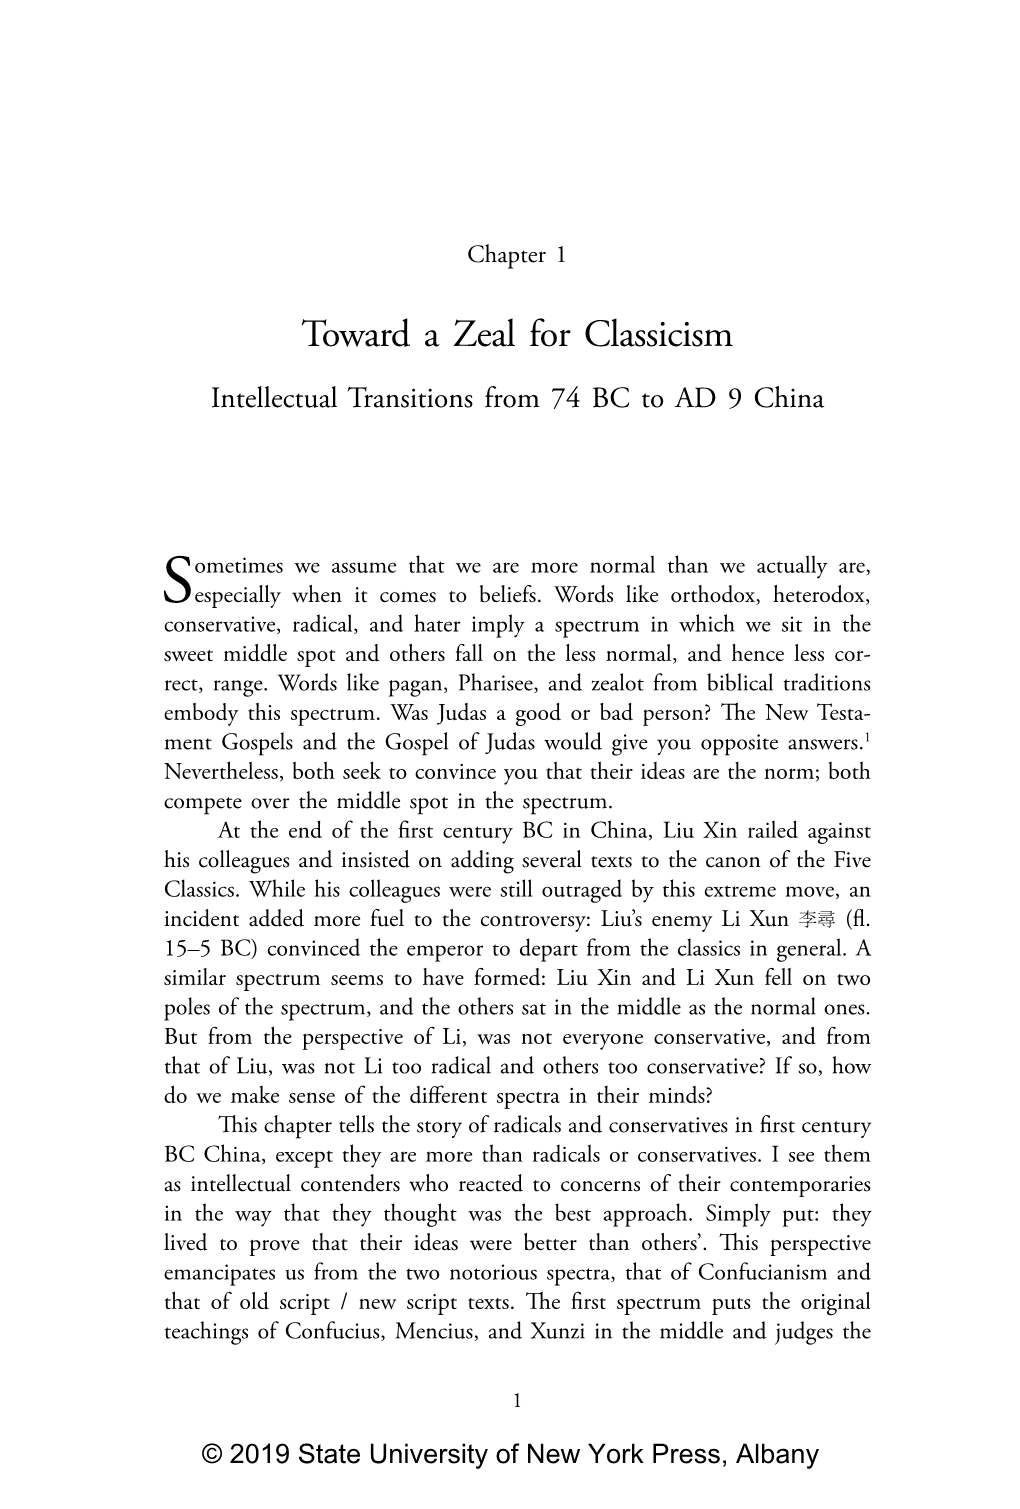 Toward a Zeal for Classicism Intellectual Transitions from 74 BC to AD 9 China